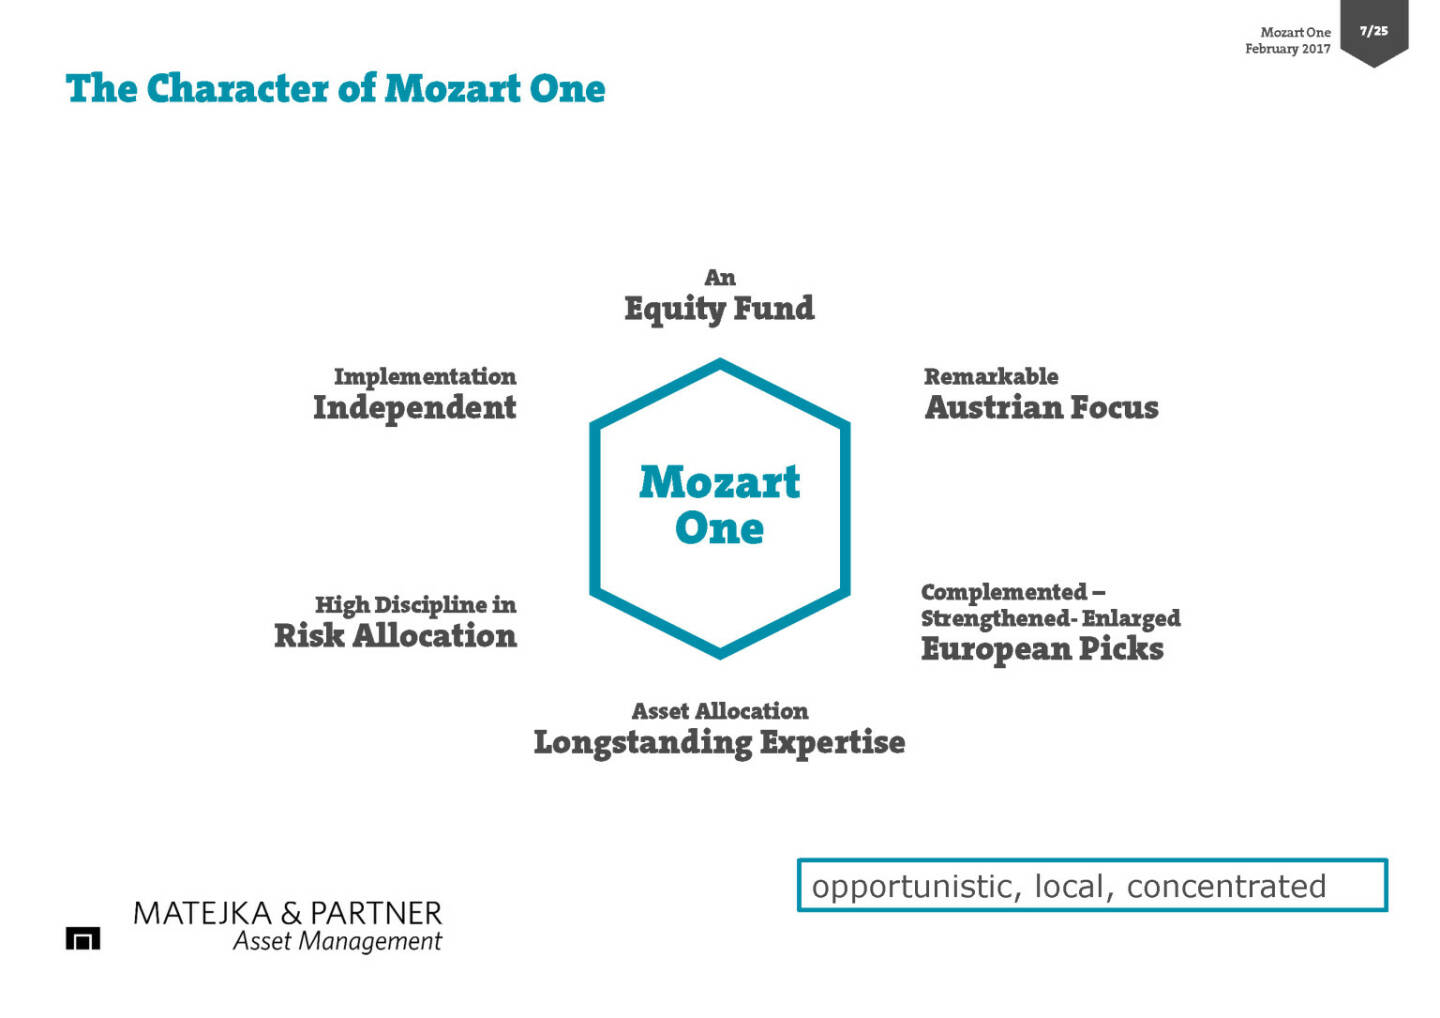 The Character of Mozart One